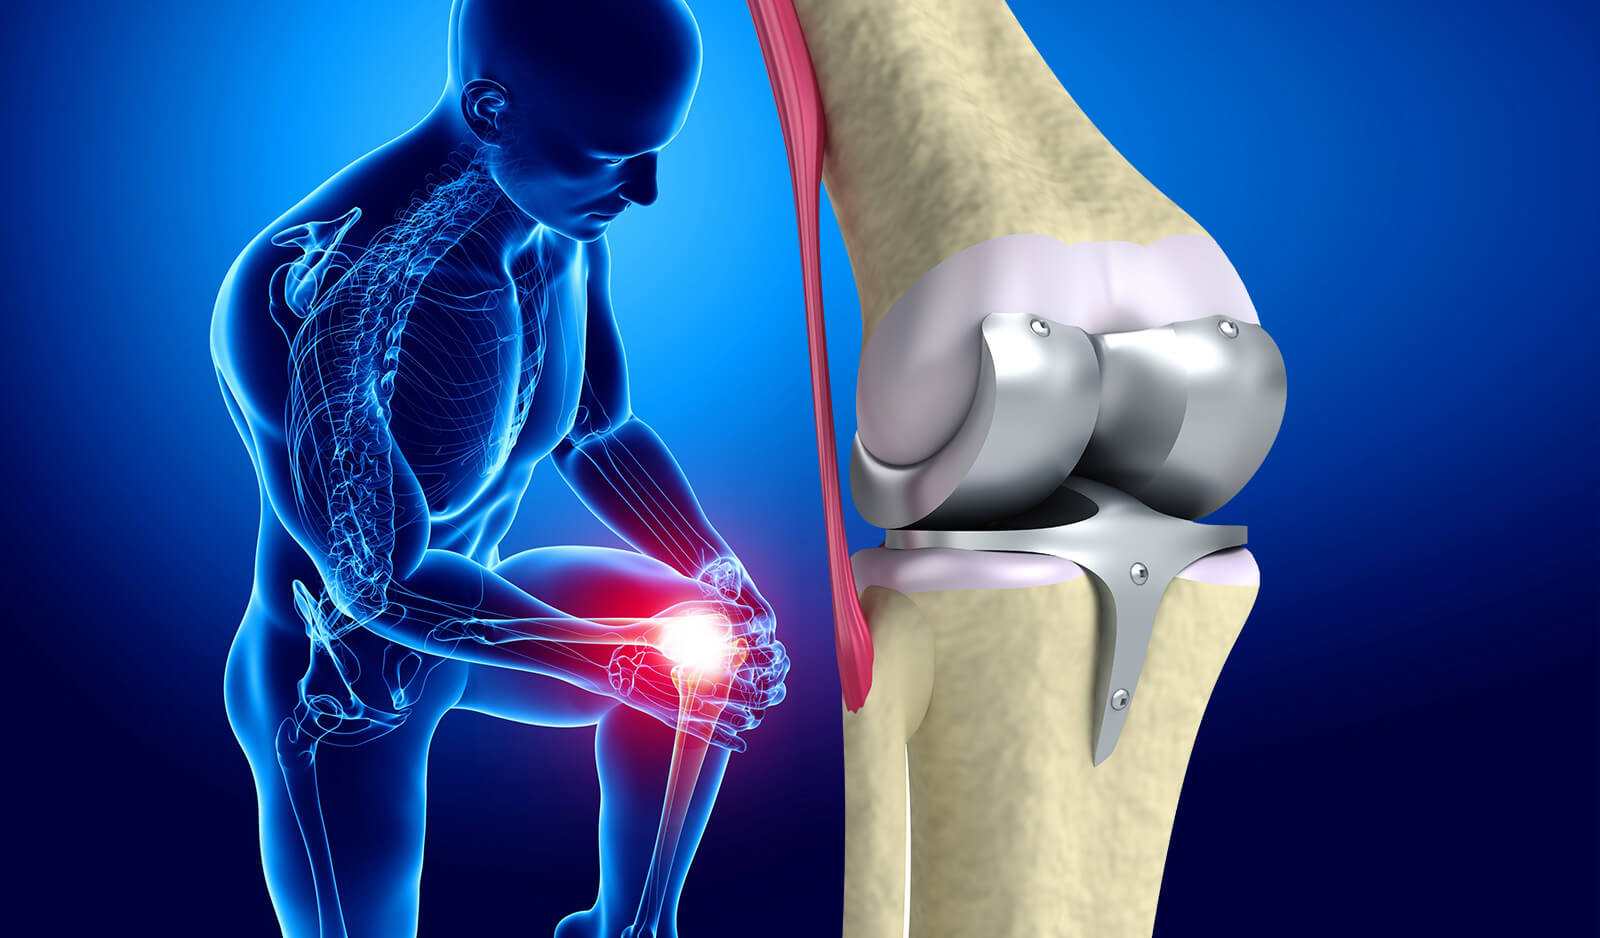 Total Knee Arthroplasty Market is Expected to be Flourished by Increasing Sports Injuries